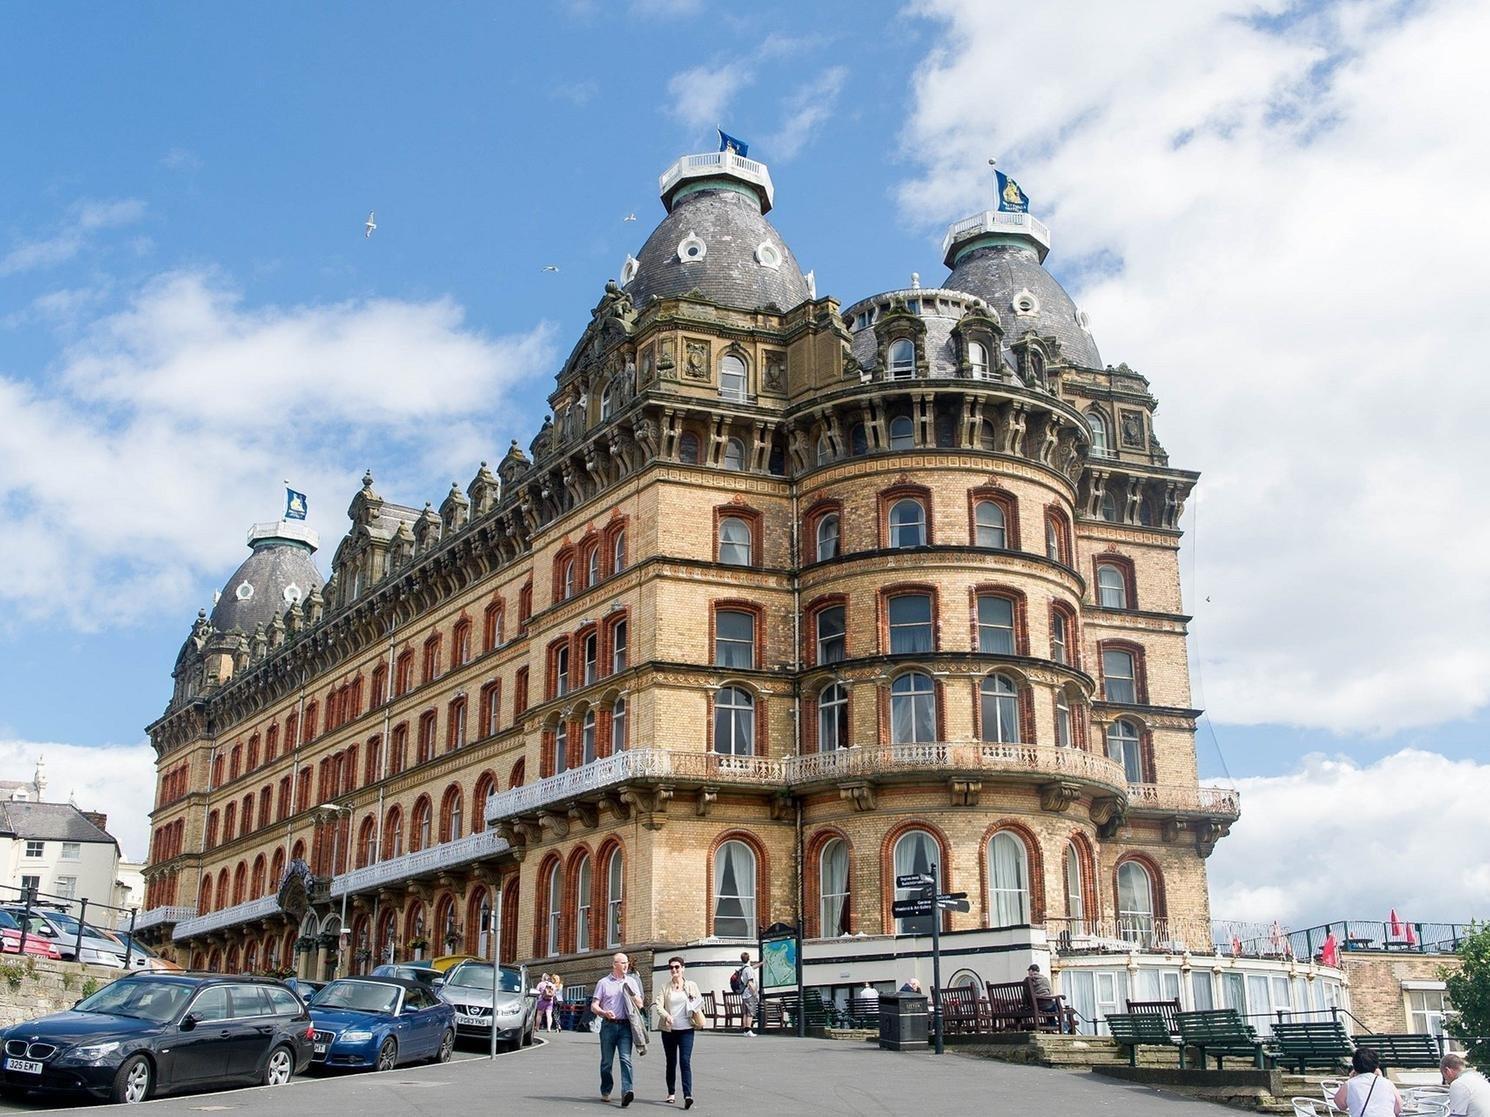 Built in 1863, the Grand Hotel on St Nicholas cliff is one of the town's most stunning Victorian buildings.